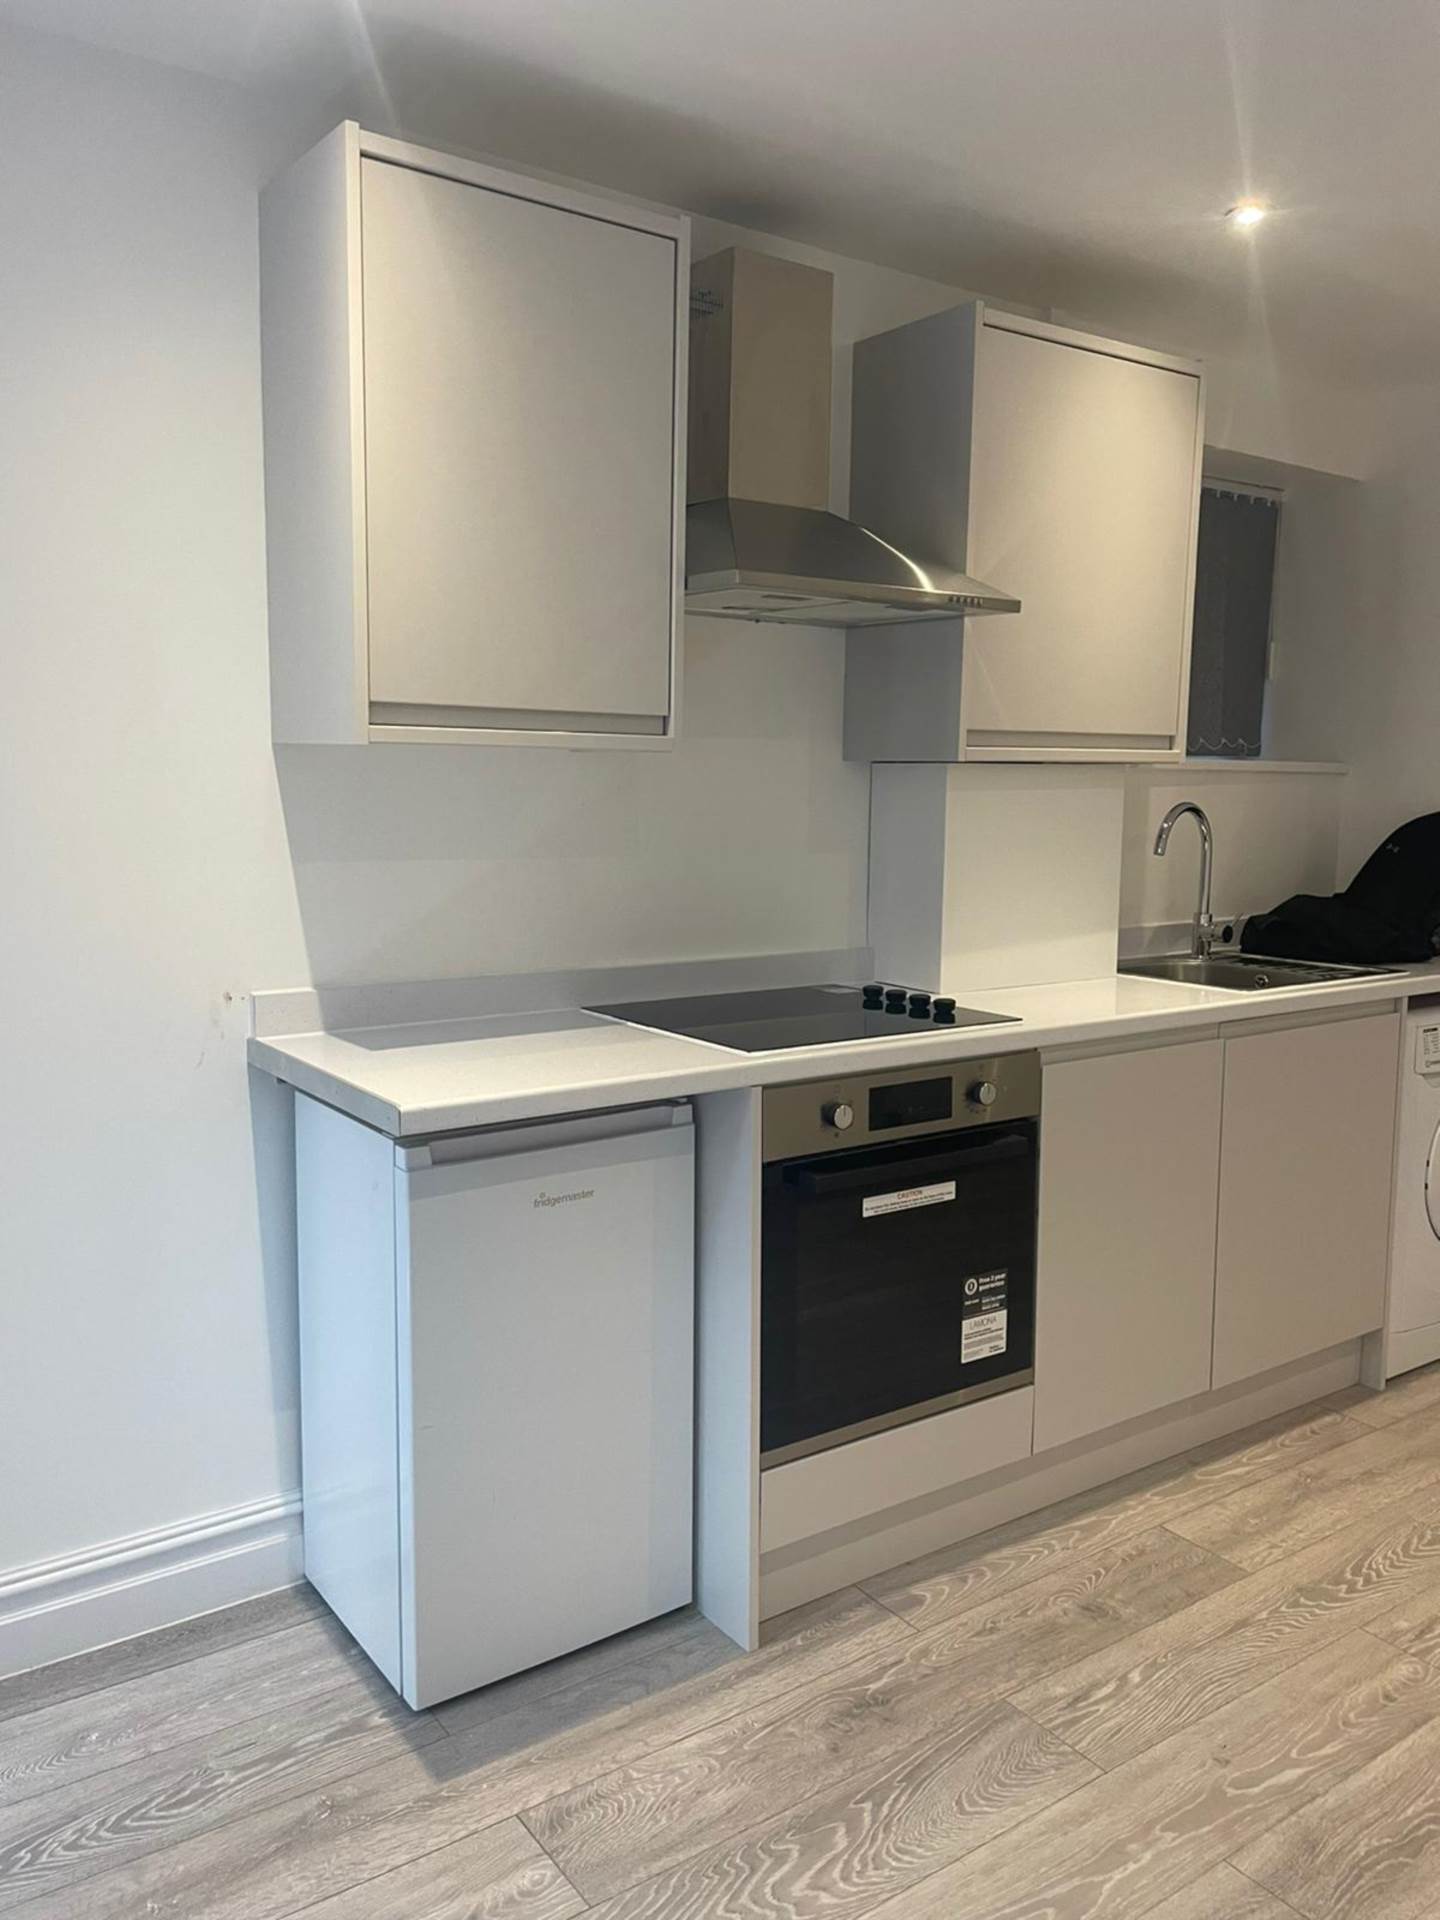 1 bed Flat for rent in Acton. From Ashley Samuel - London - West